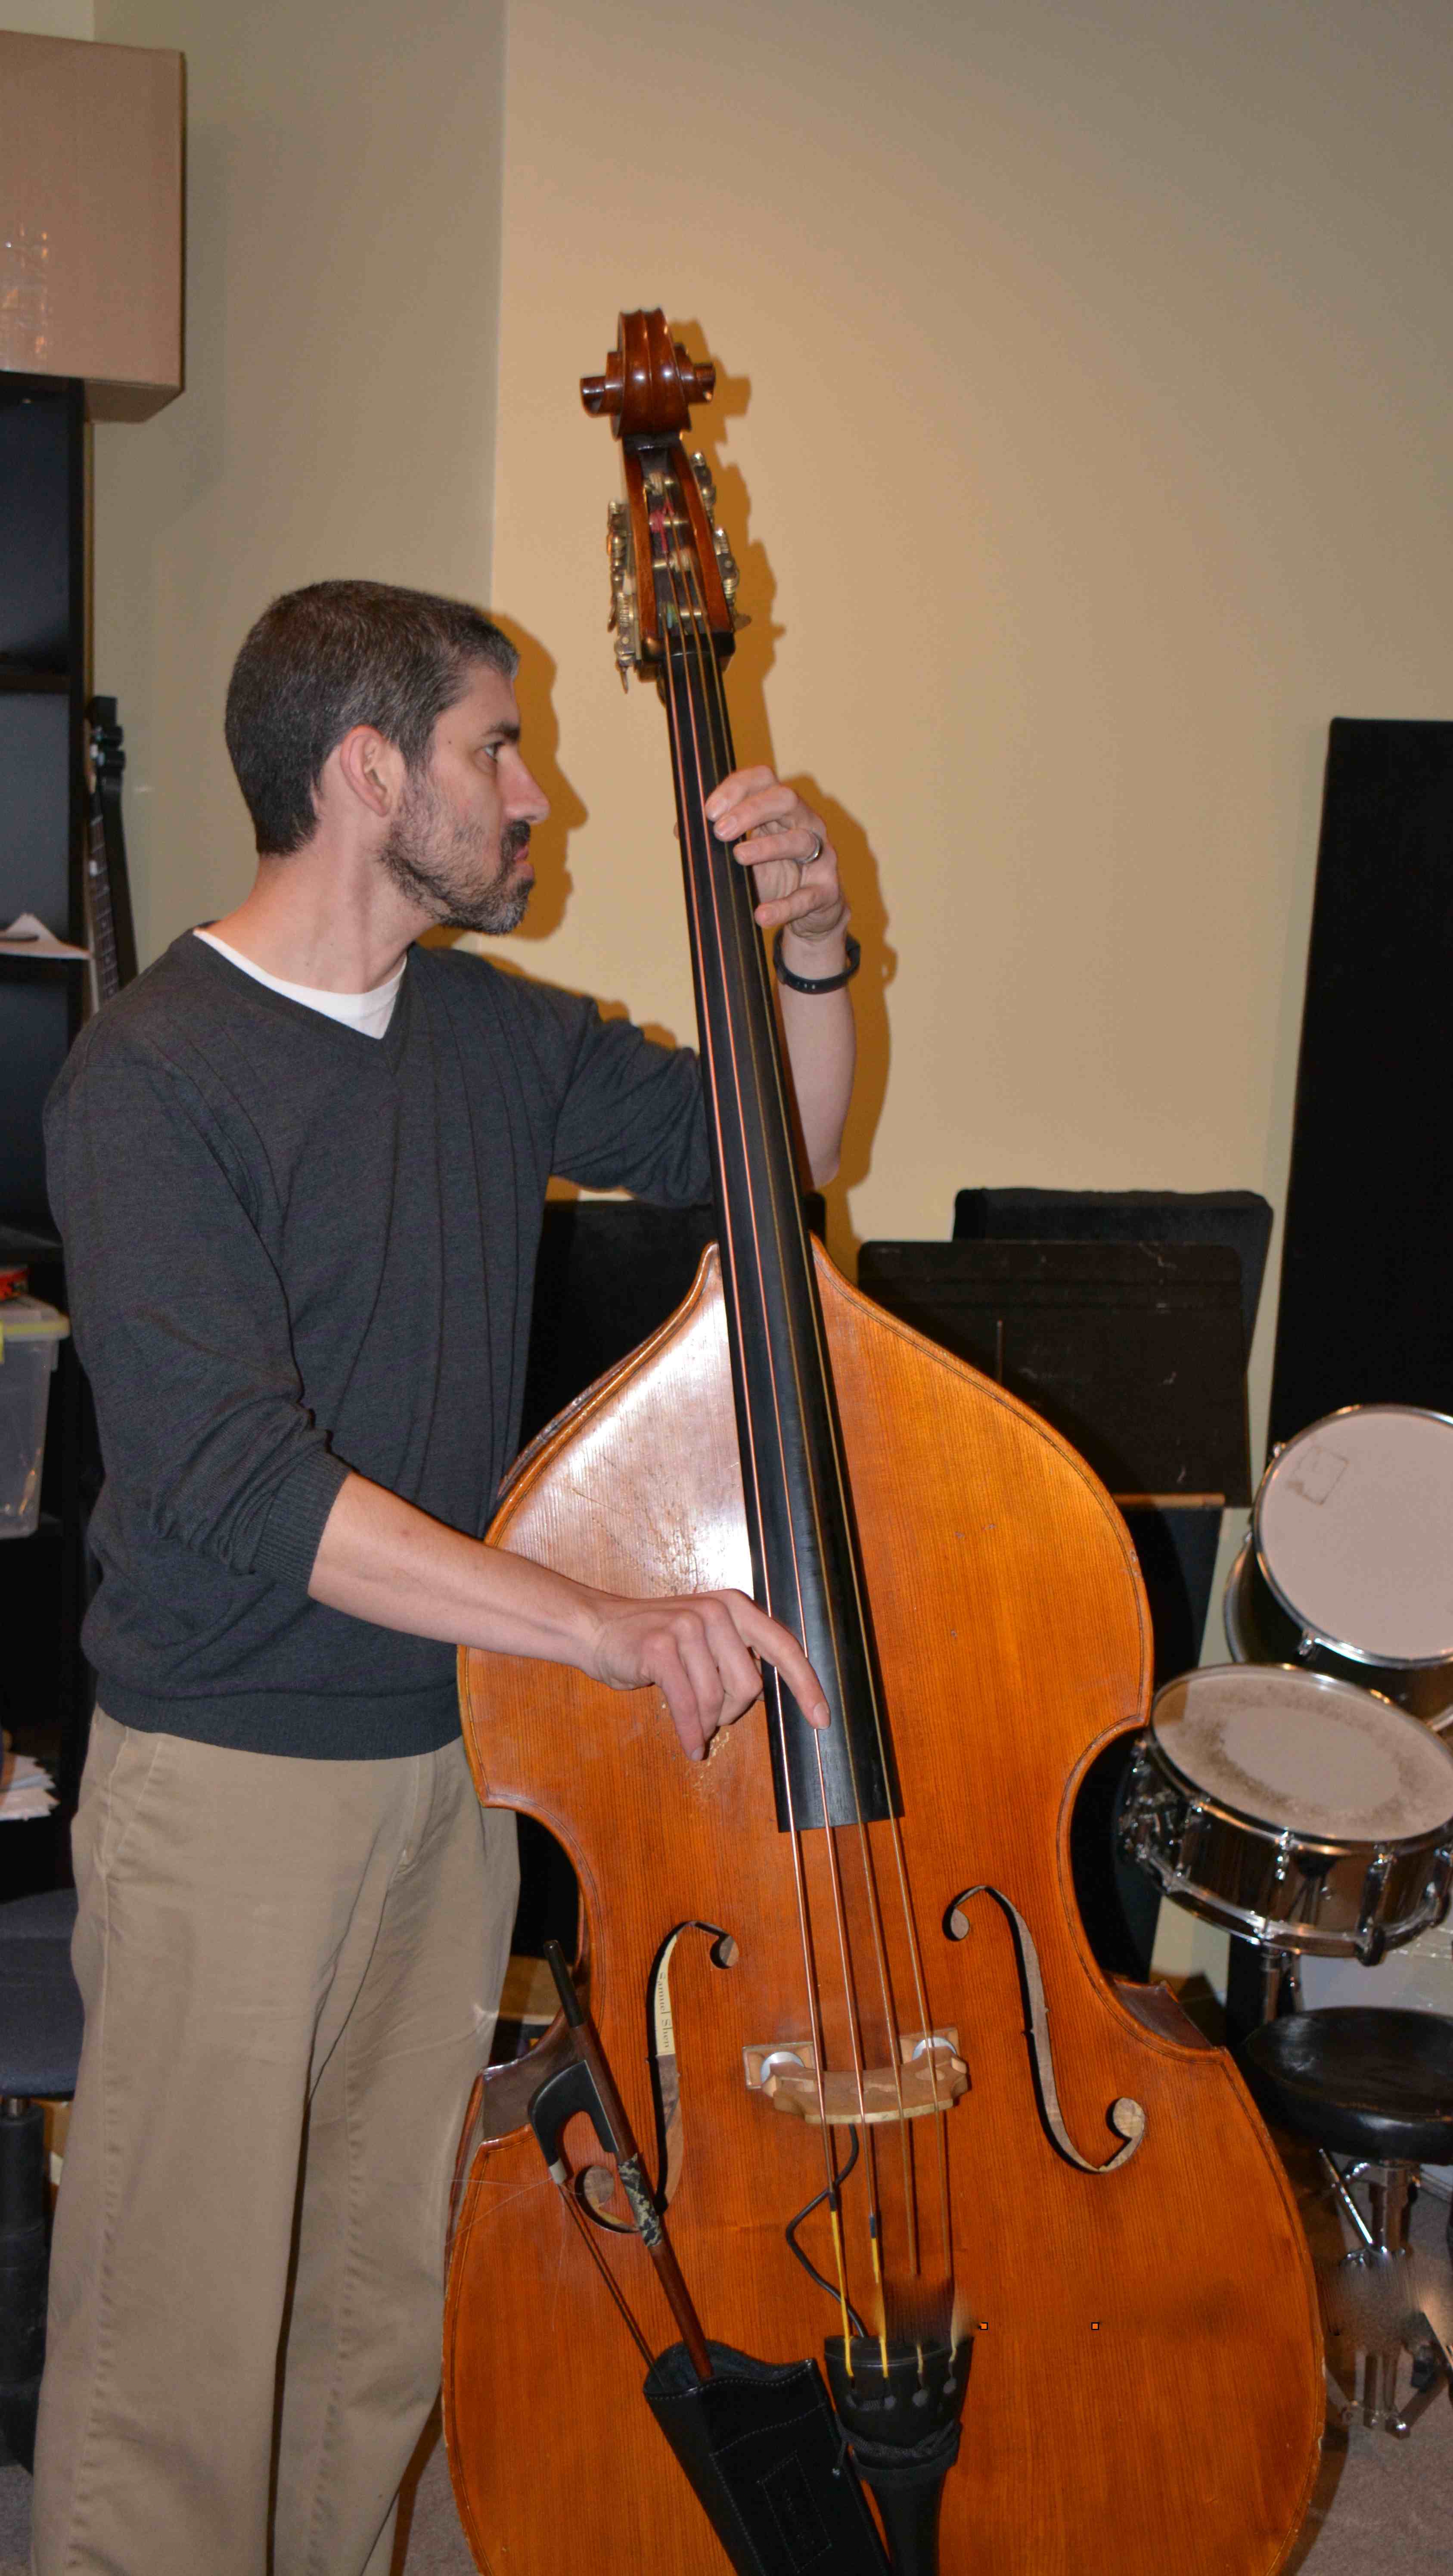 Our teacher, Marc, with his upright bass!